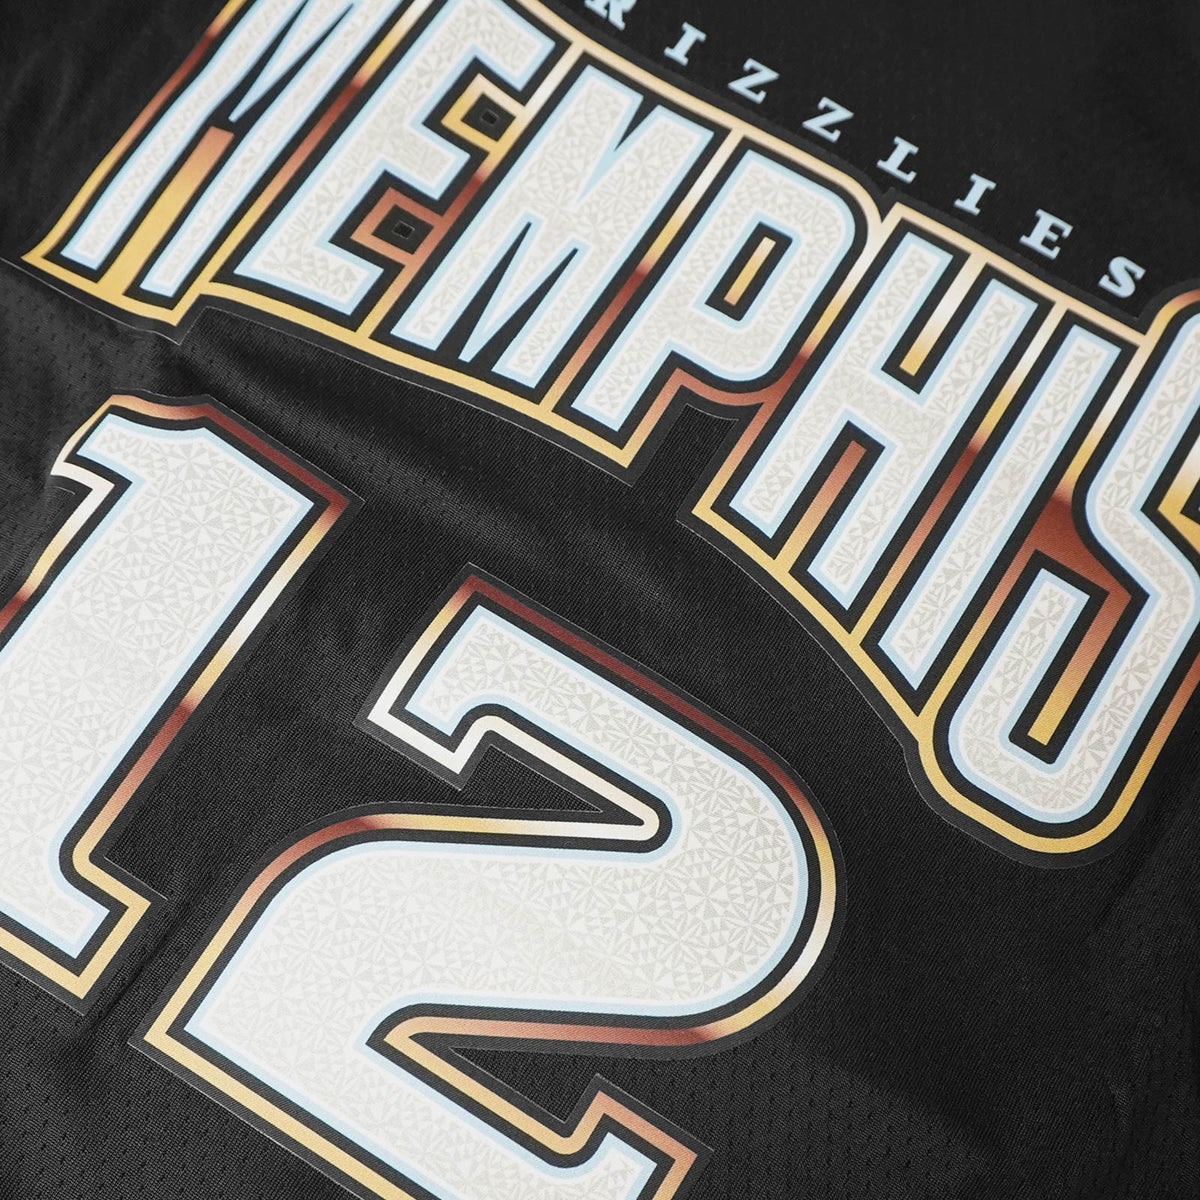 Shop Memphis Grizzlies City Jersey with great discounts and prices